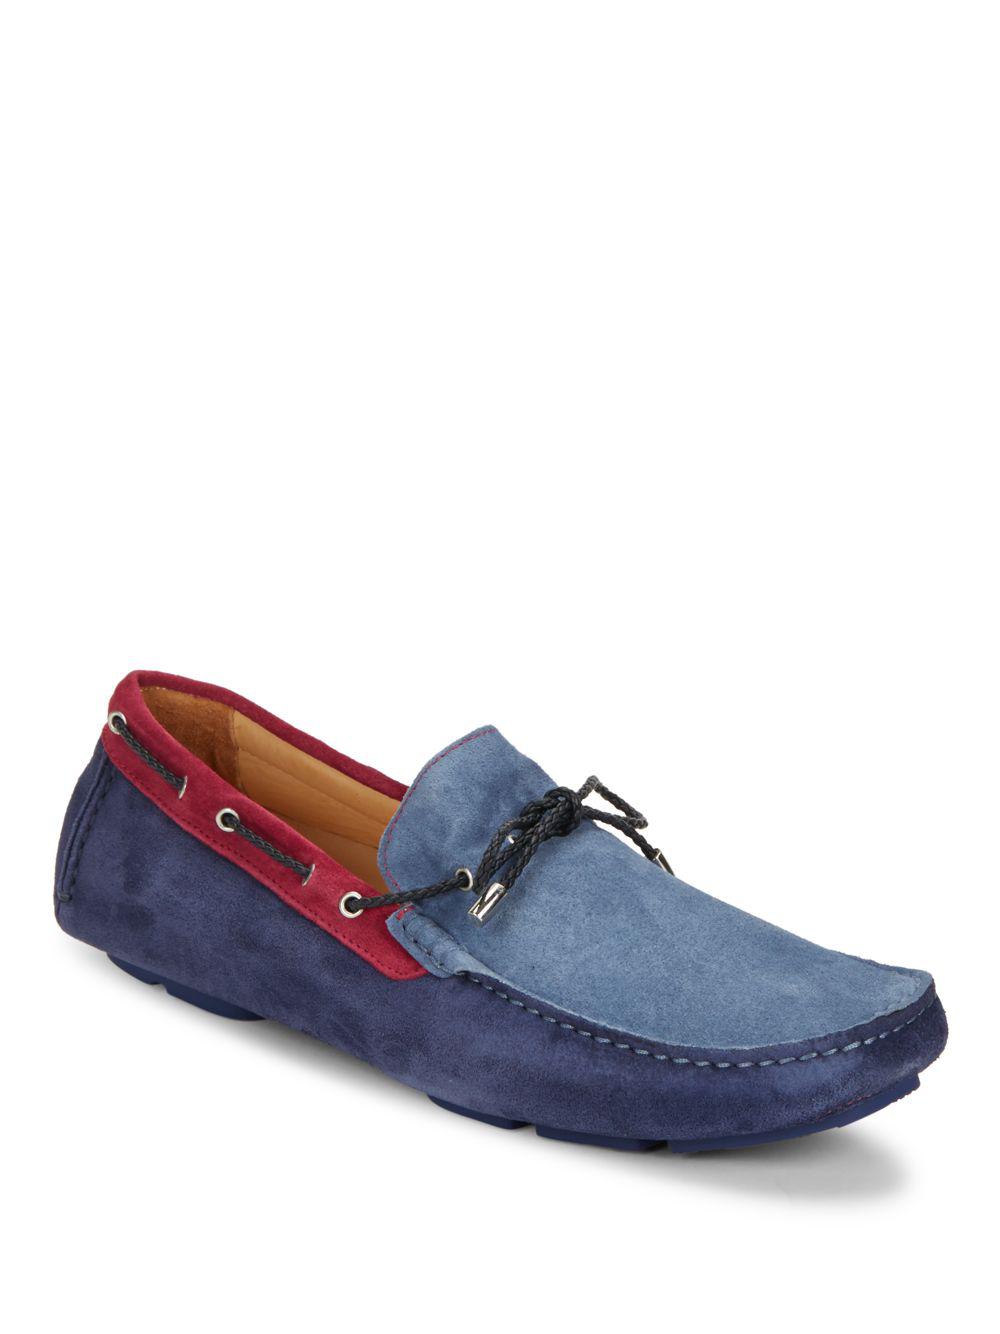 MXL Mens Driving Penny Loafers Suede 